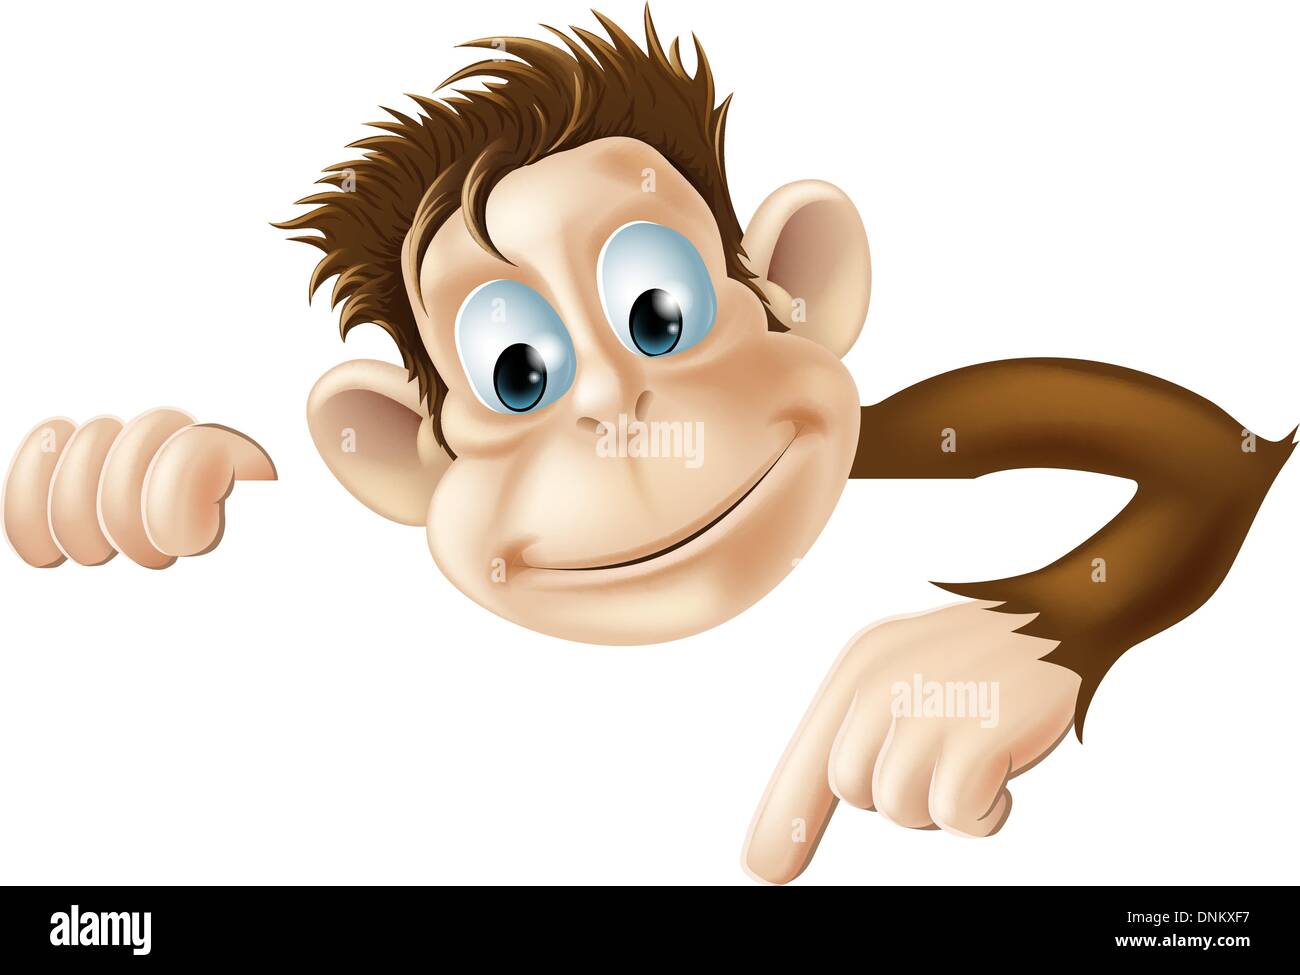 An illustration of a cute cartoon monkey peeking round from behind a sign and pointing or showing what it says Stock Vector